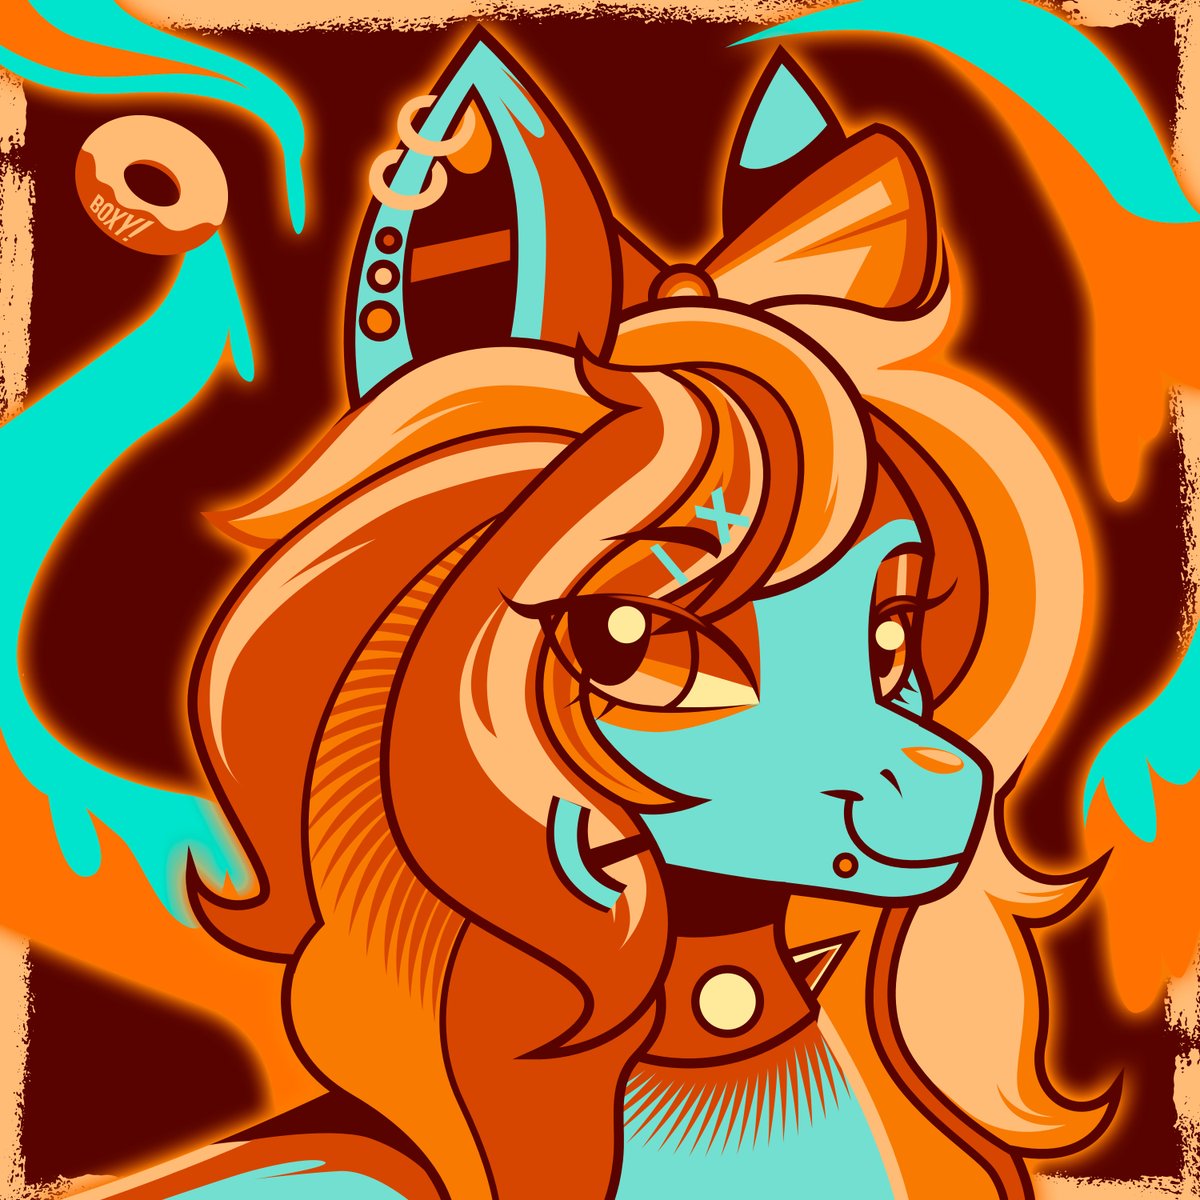 Commission Emergency icon for @SawahNox 

Thanksforsupport<3

#brony #mlp